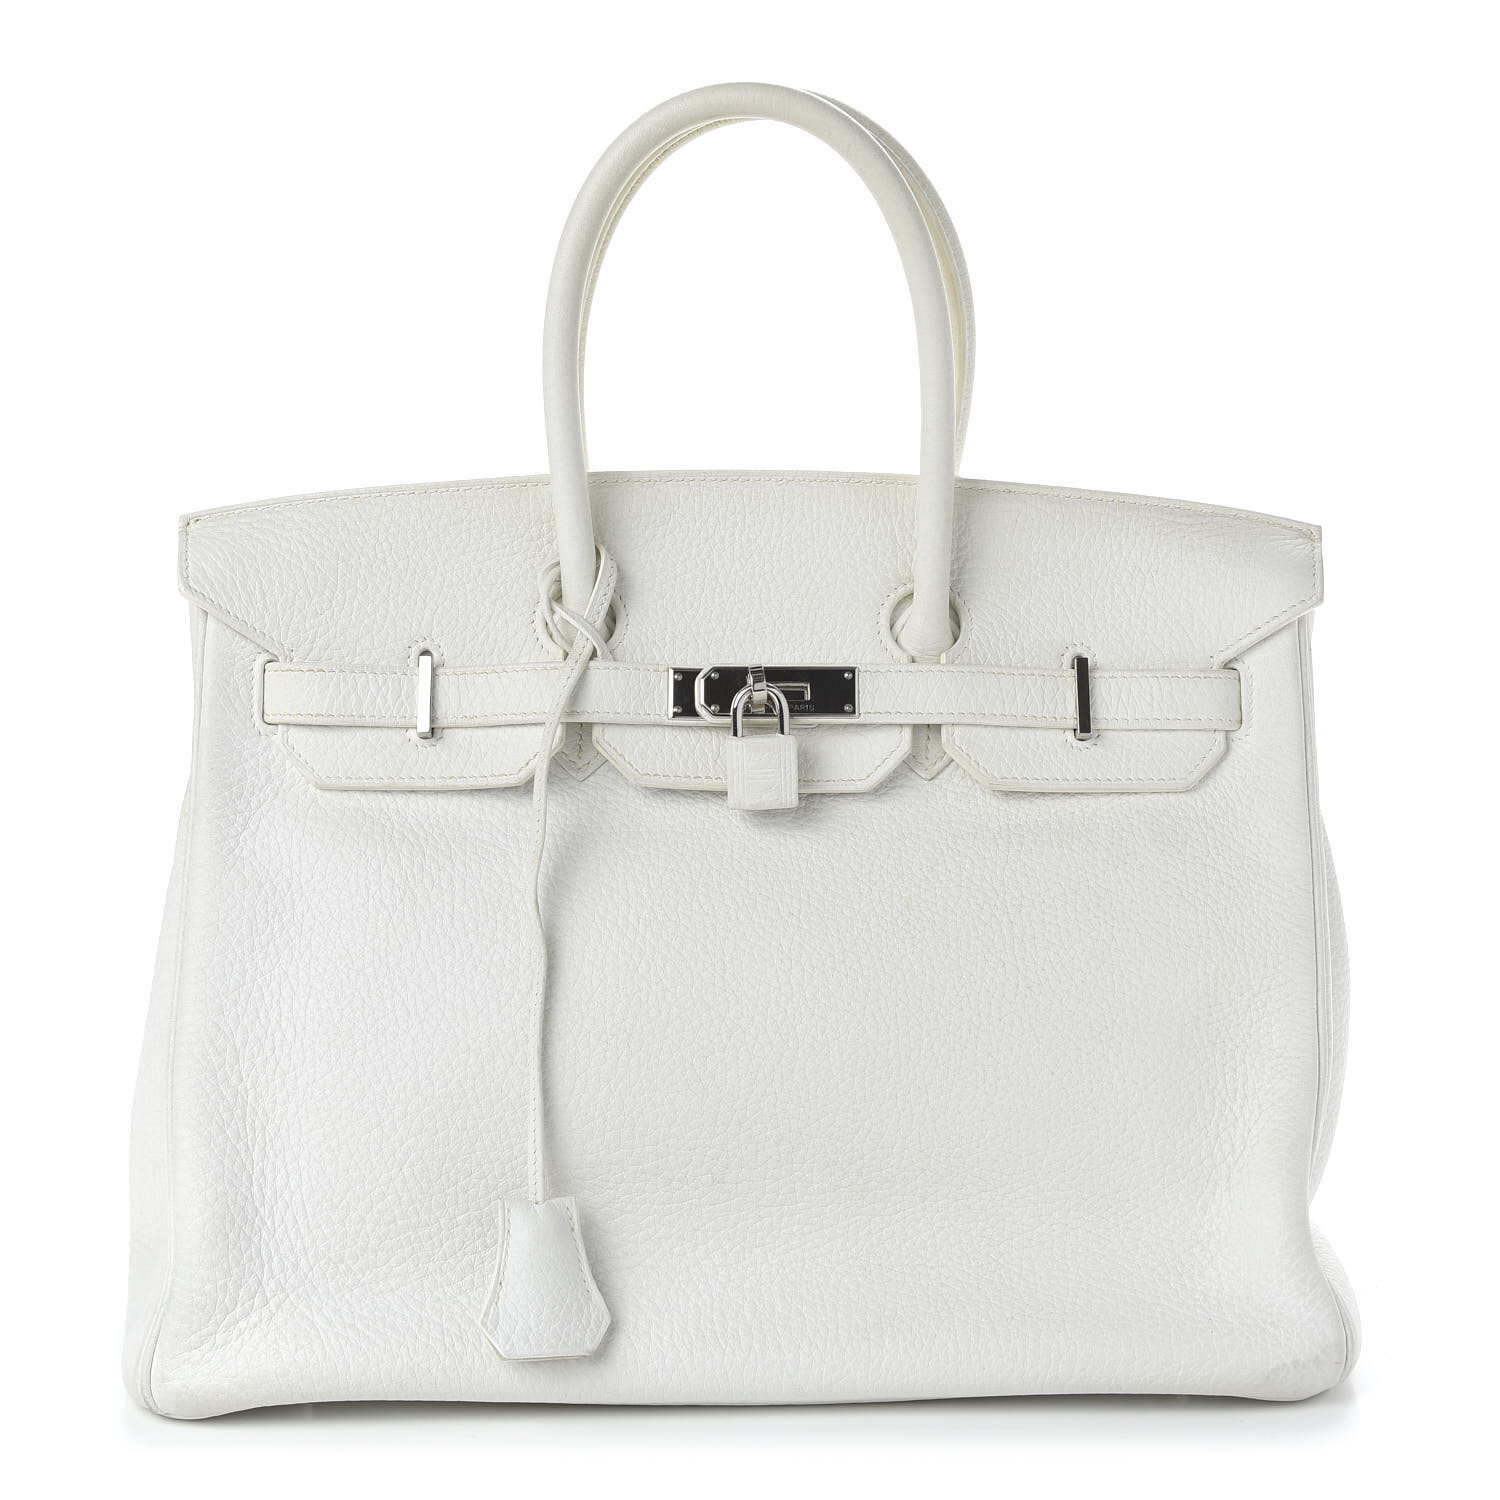 Hermes Taurillon Clemence Birkin 35 White AVAILABLE FOR SALE ...